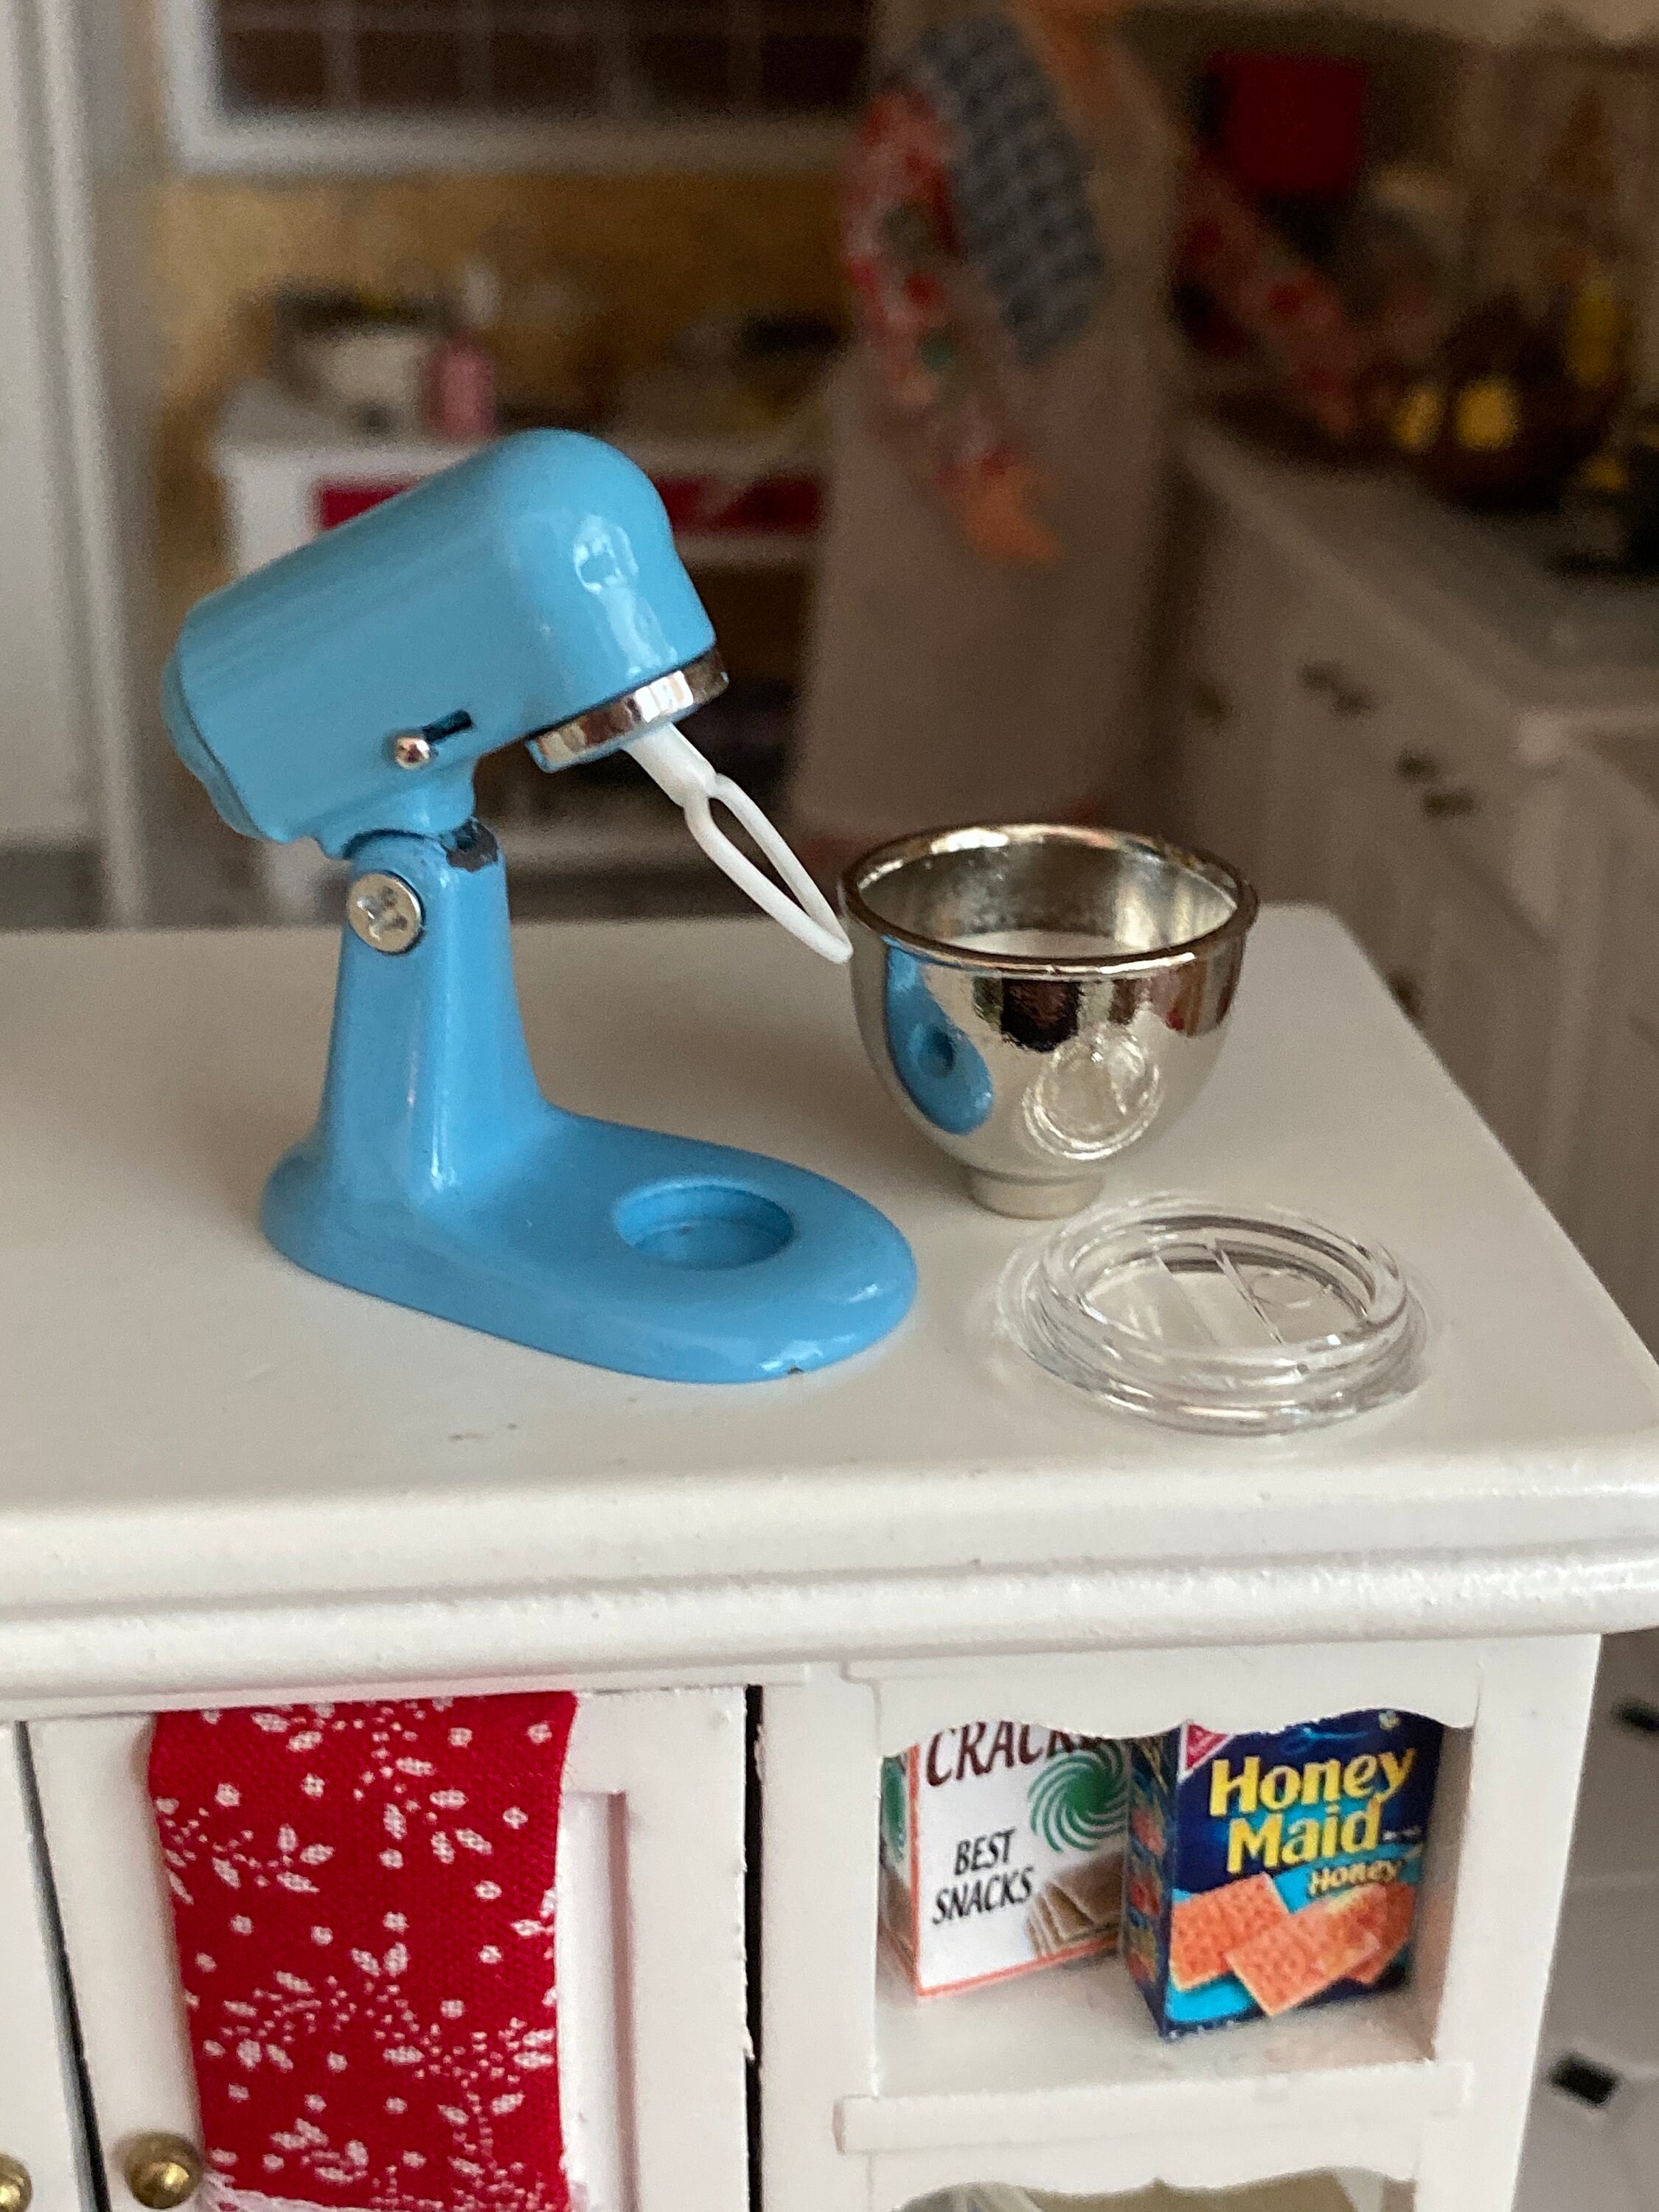 Download Miniature Mixer With Removable Bowl and Spatter Cover, Blue Stand Mixer, Dollhouse Miniature, 1 ...